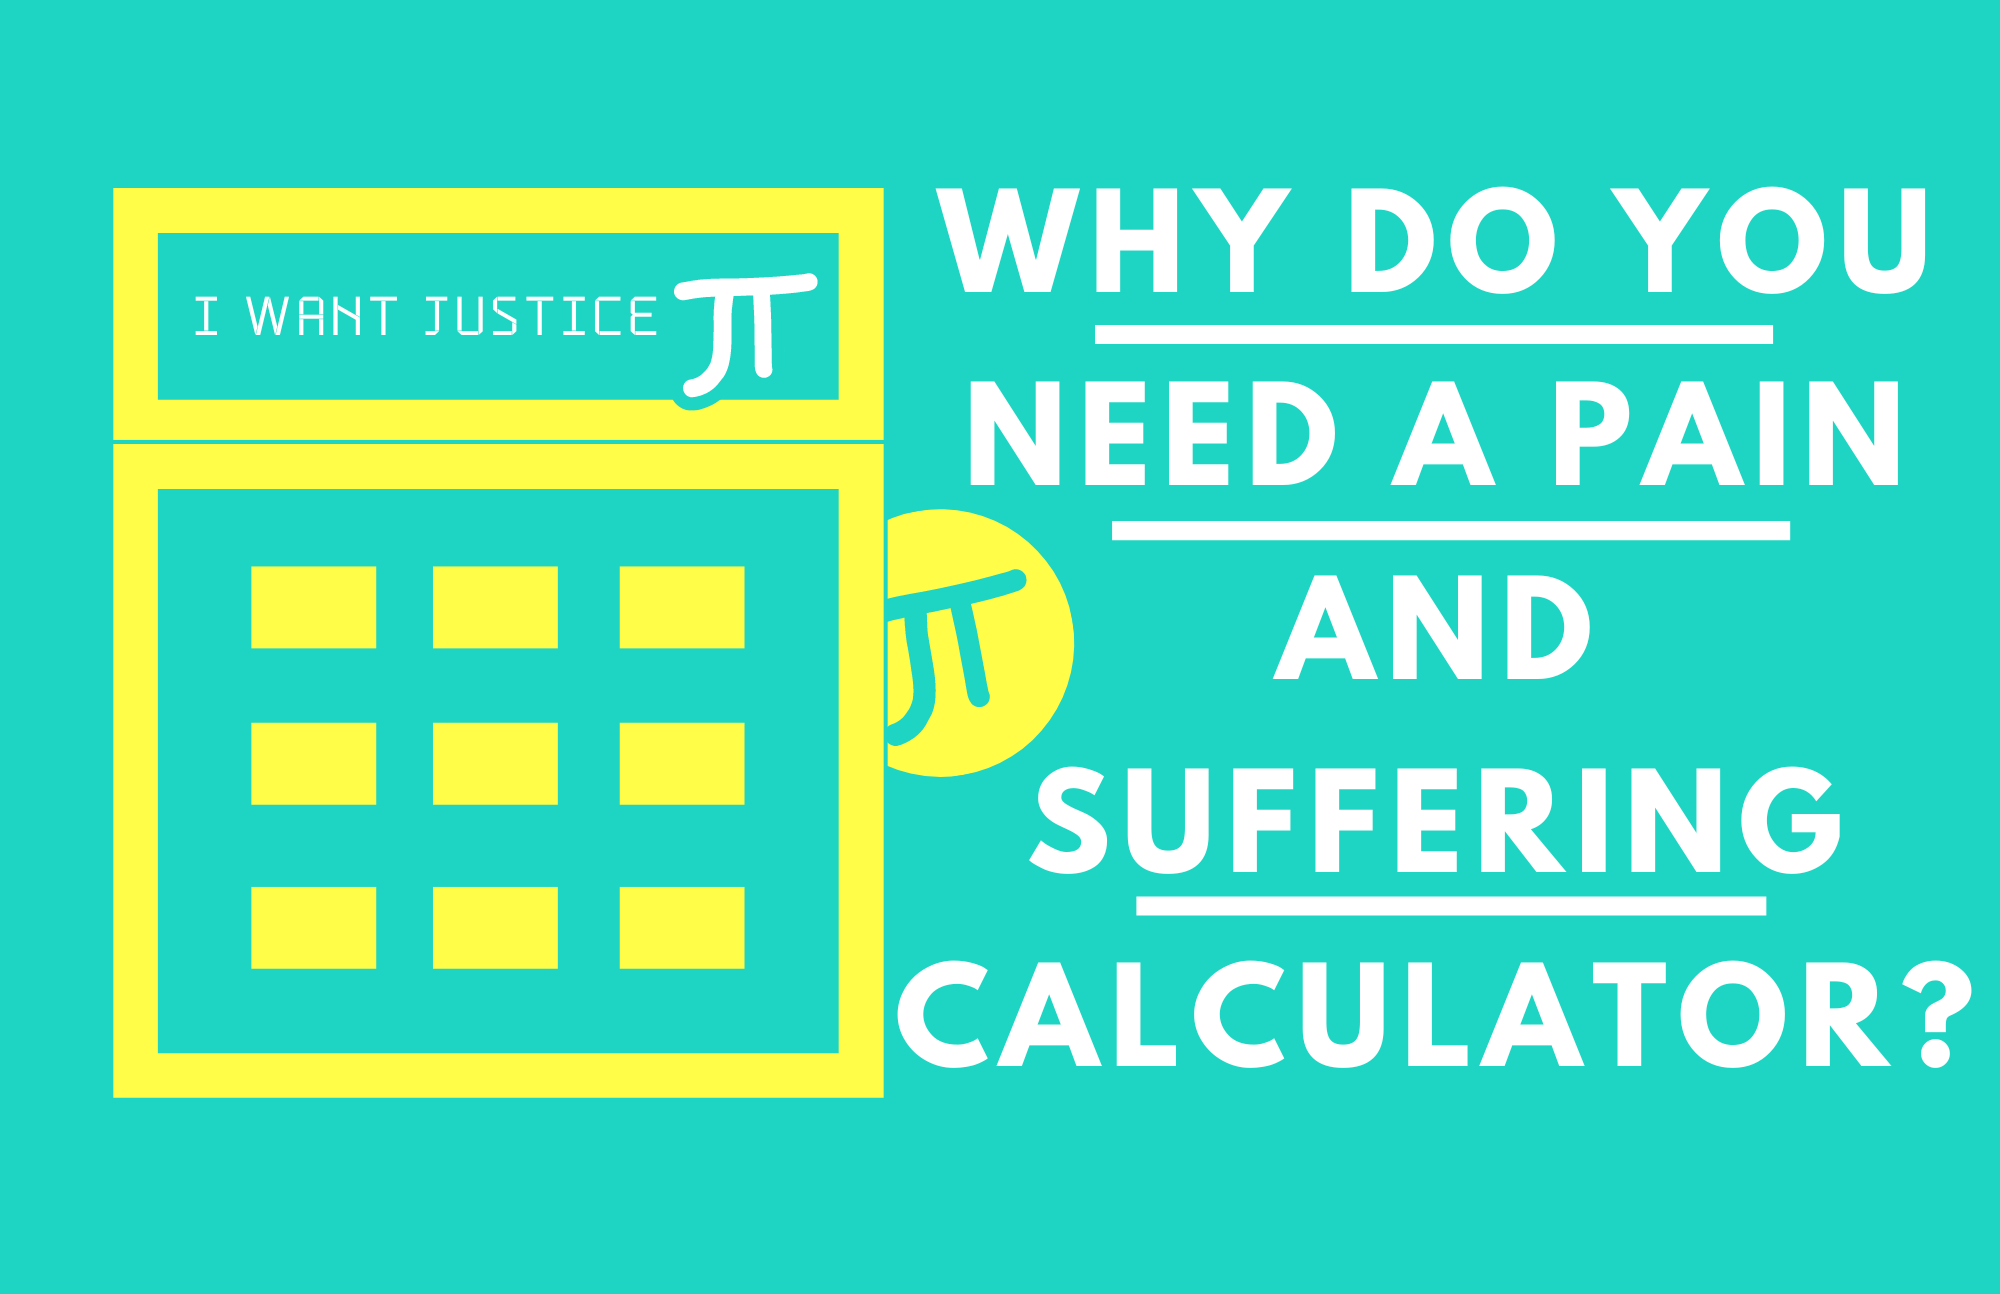 The Need for a Pain and Suffering Calculator